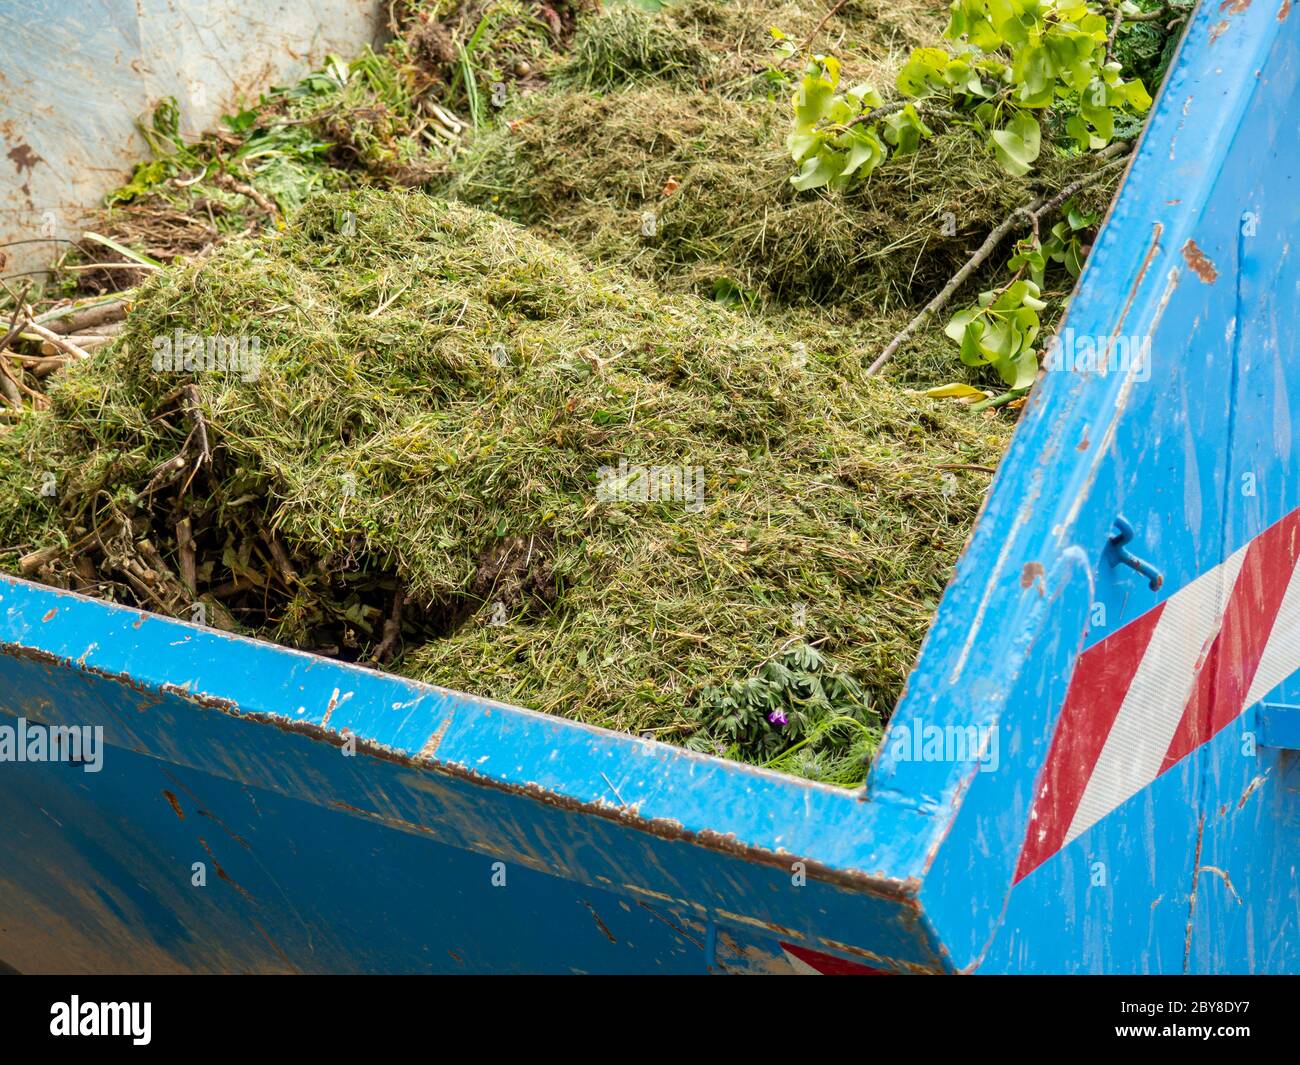 Lawn clippings in the green waste container Stock Photo